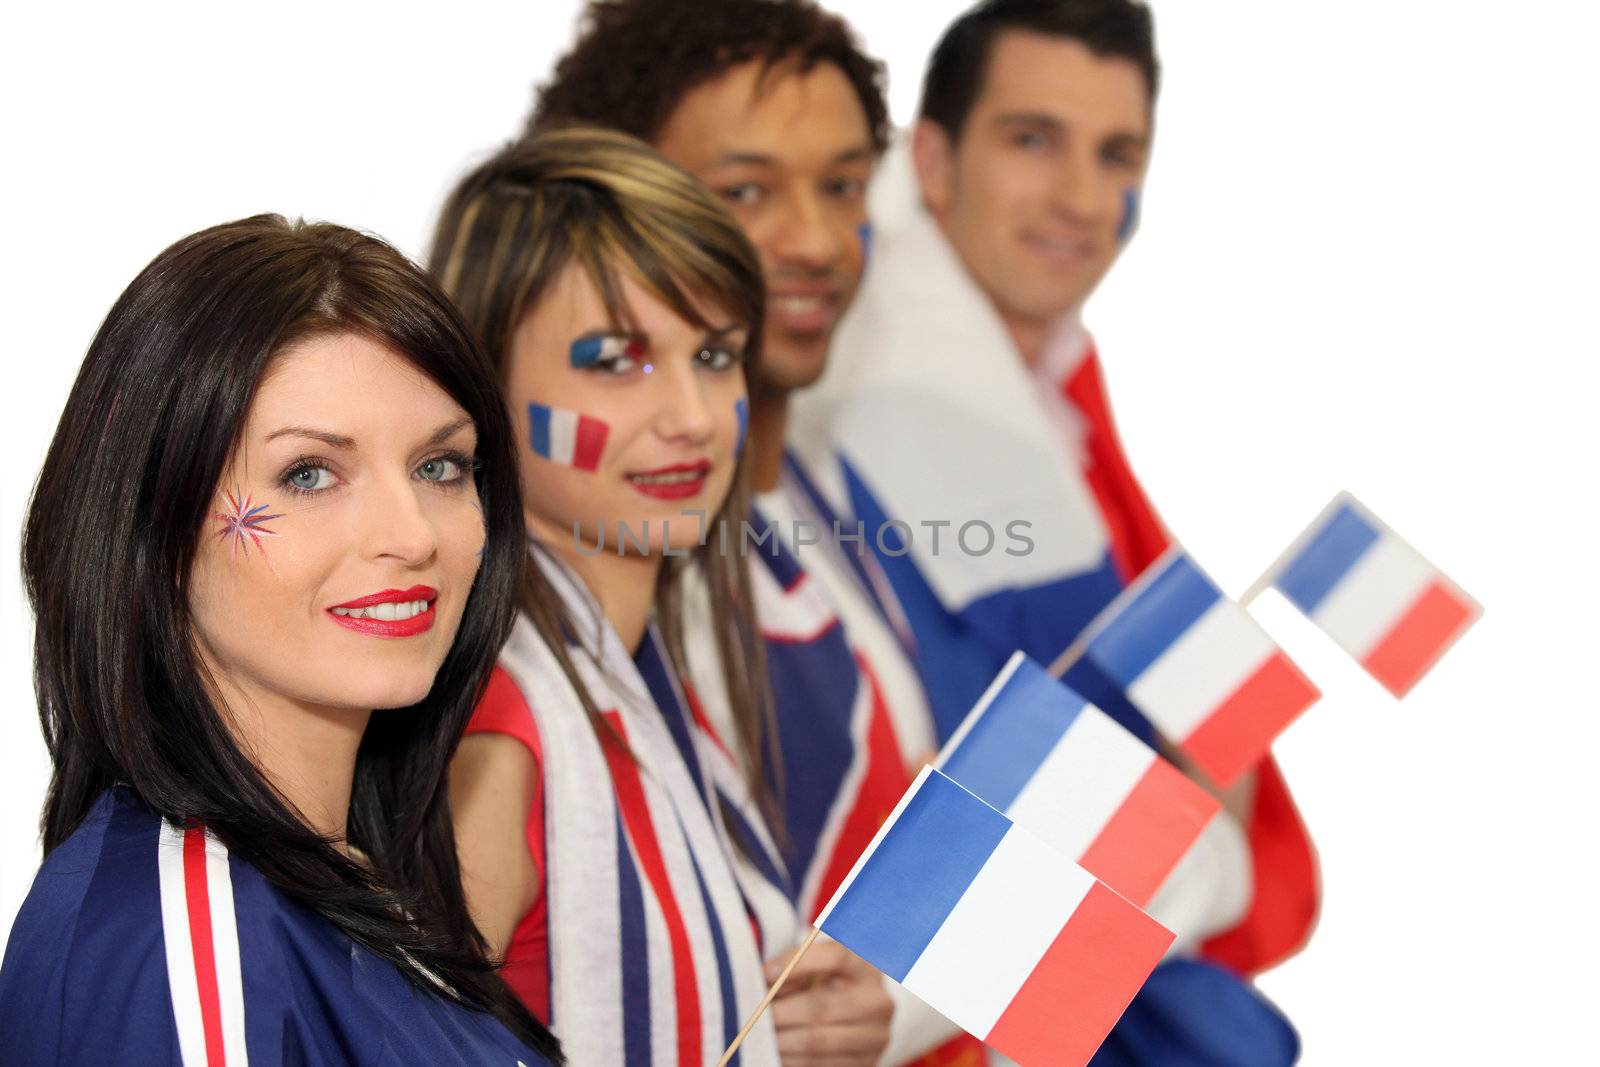 Group of French football supporters by phovoir